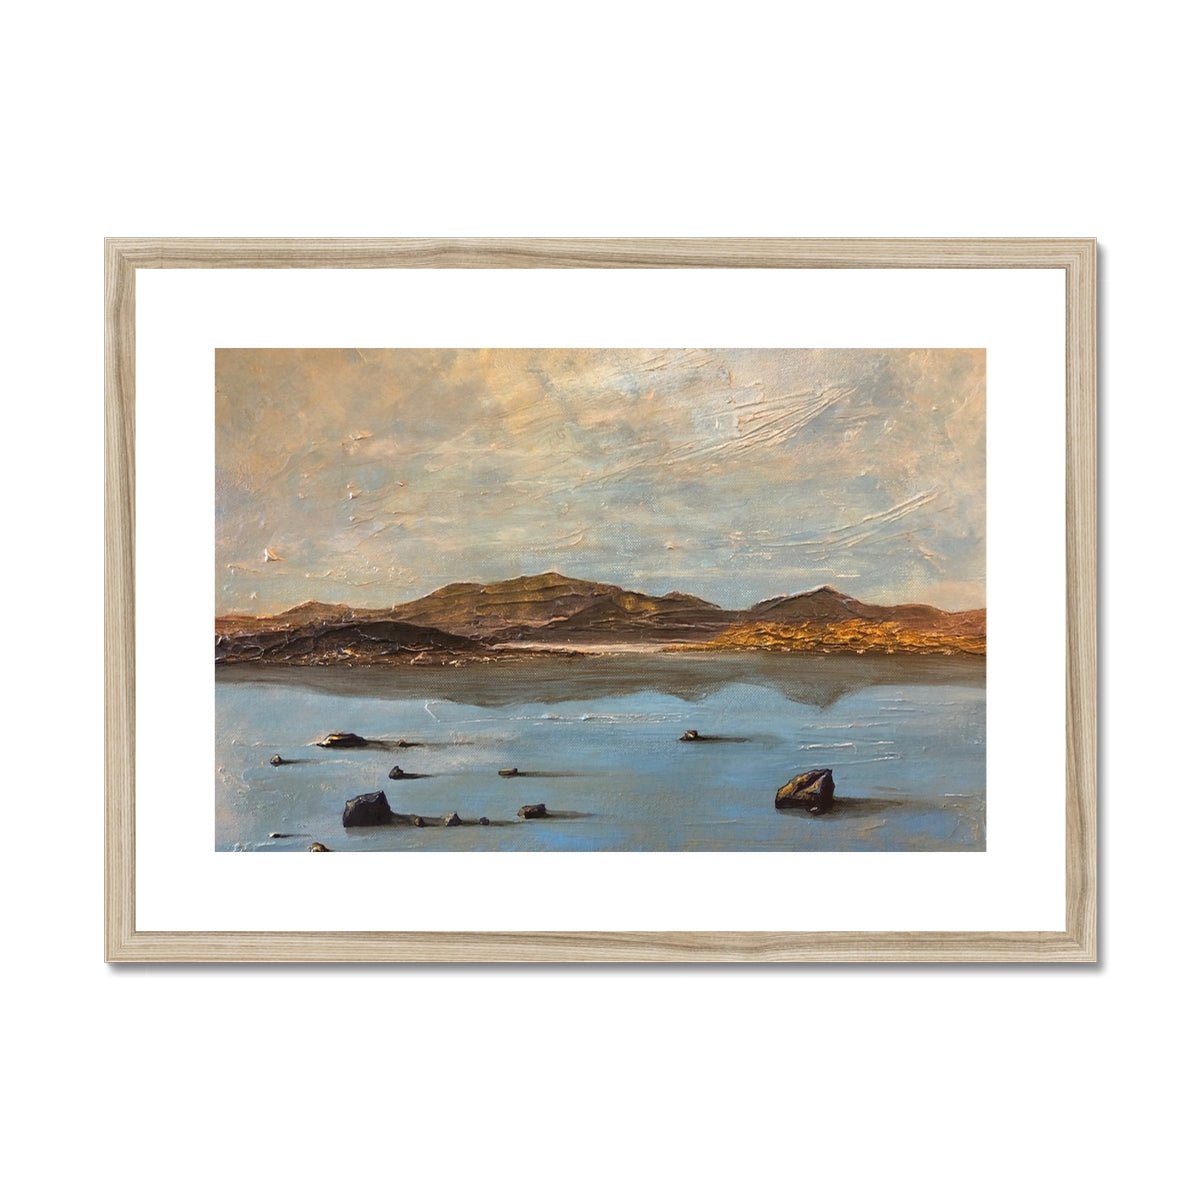 Loch Druidibeg South Uist Painting | Framed & Mounted Prints From Scotland-Framed & Mounted Prints-Scottish Lochs Art Gallery-A2 Landscape-Natural Frame-Paintings, Prints, Homeware, Art Gifts From Scotland By Scottish Artist Kevin Hunter